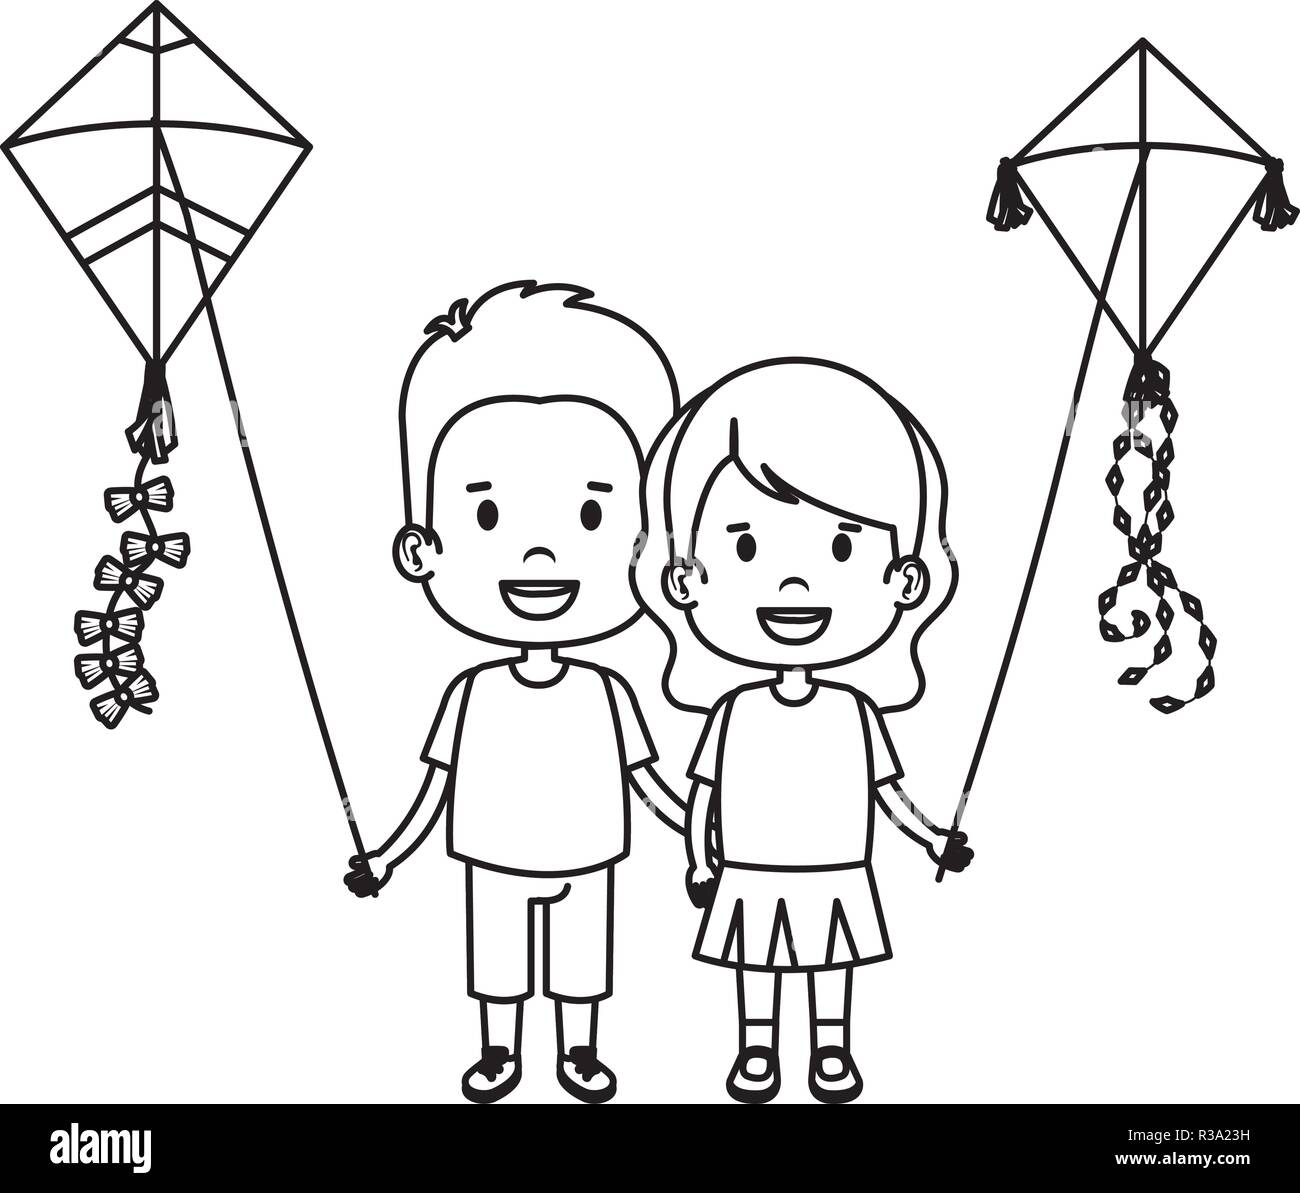 kids couple with kite flying Stock Vector